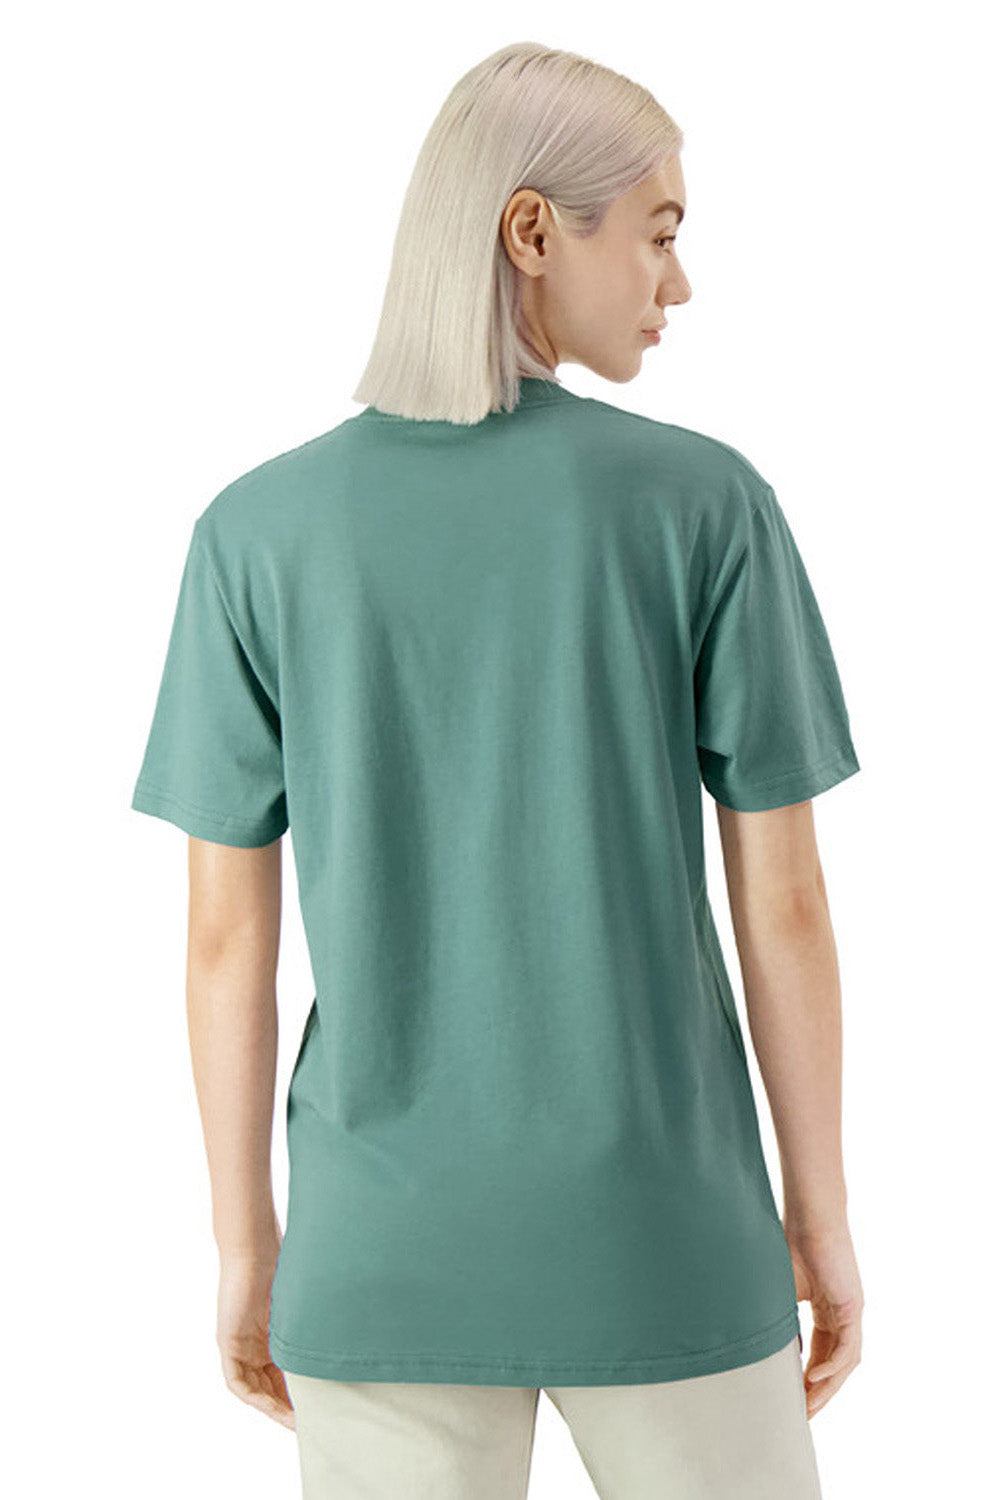 American Apparel 5389 Mens Sueded Cloud Short Sleeve Crewneck T-Shirt Sueded Arctic Model Back